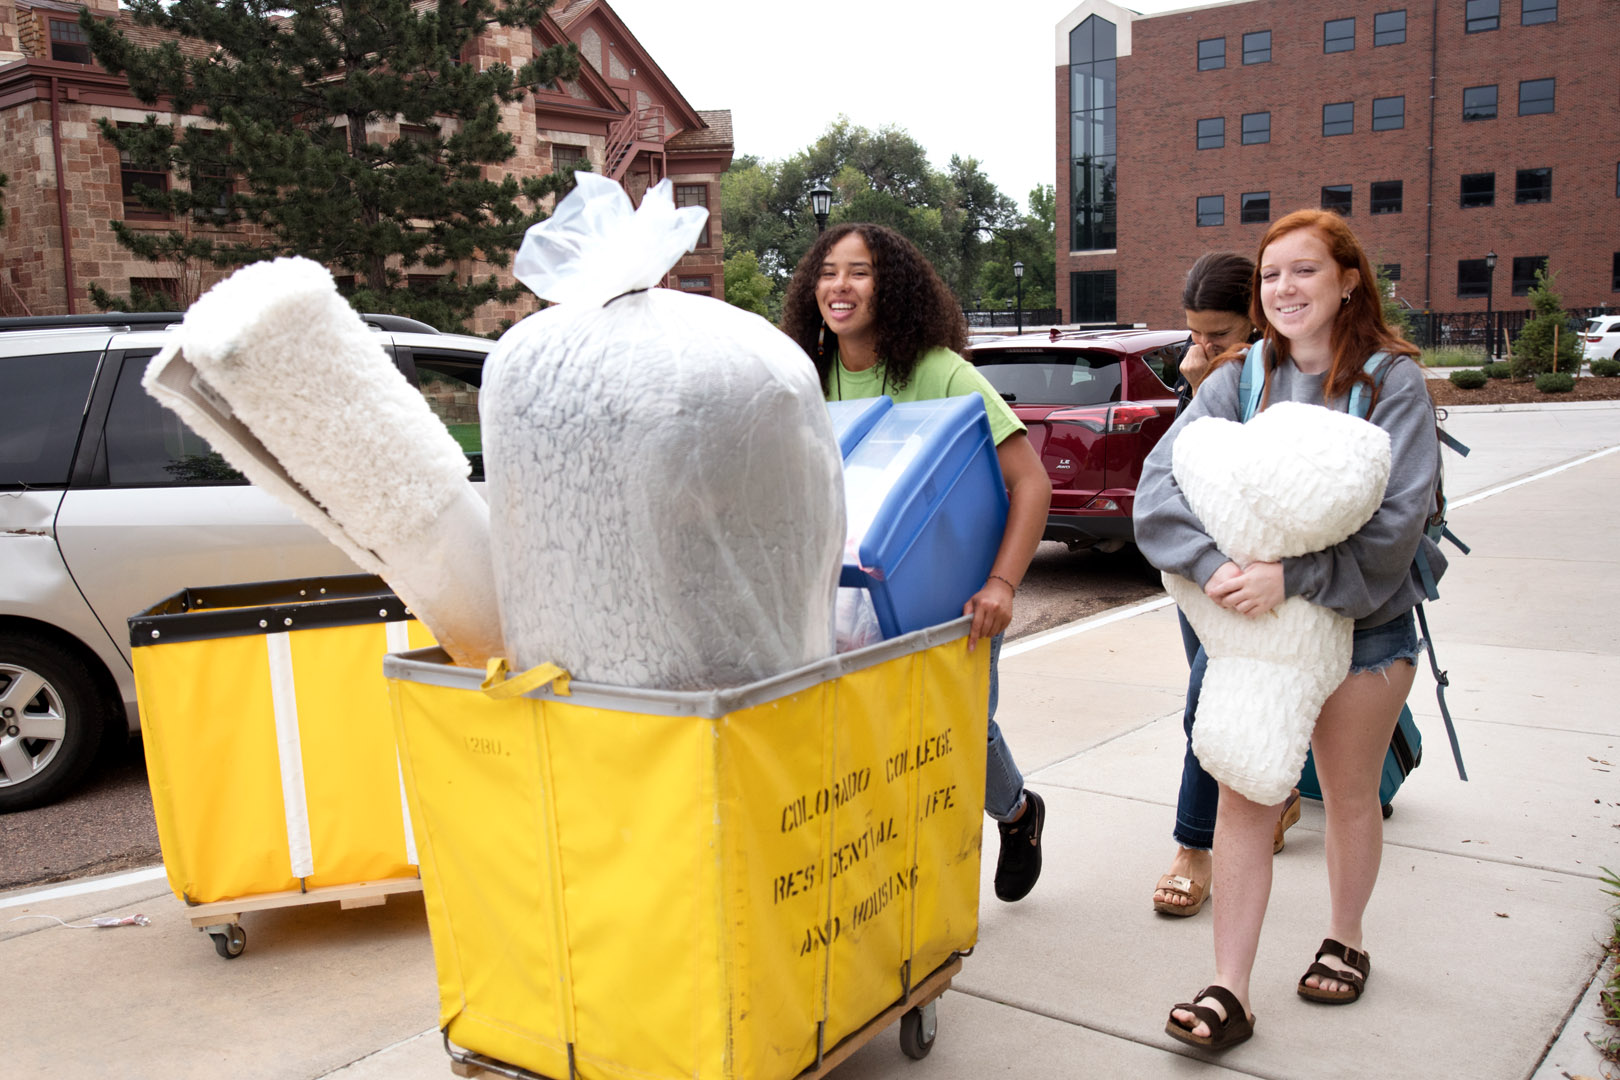 First-year students move into their residence halls. Photo by <strong>Vivian Nguyen '20</strong>